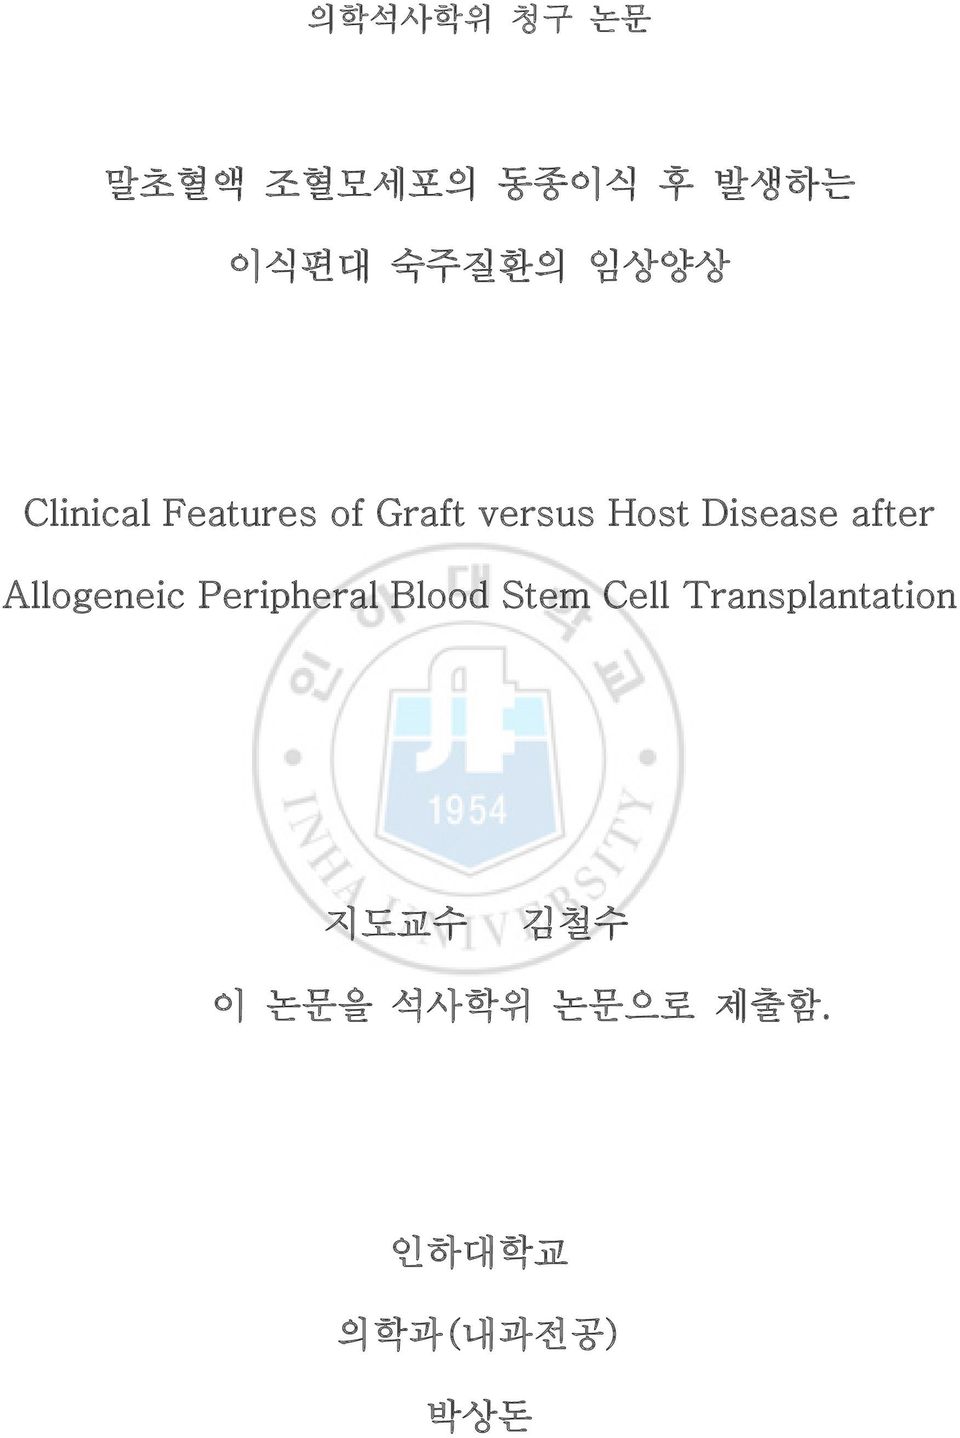 Allogeneic Peripheral Blood Stem Cell